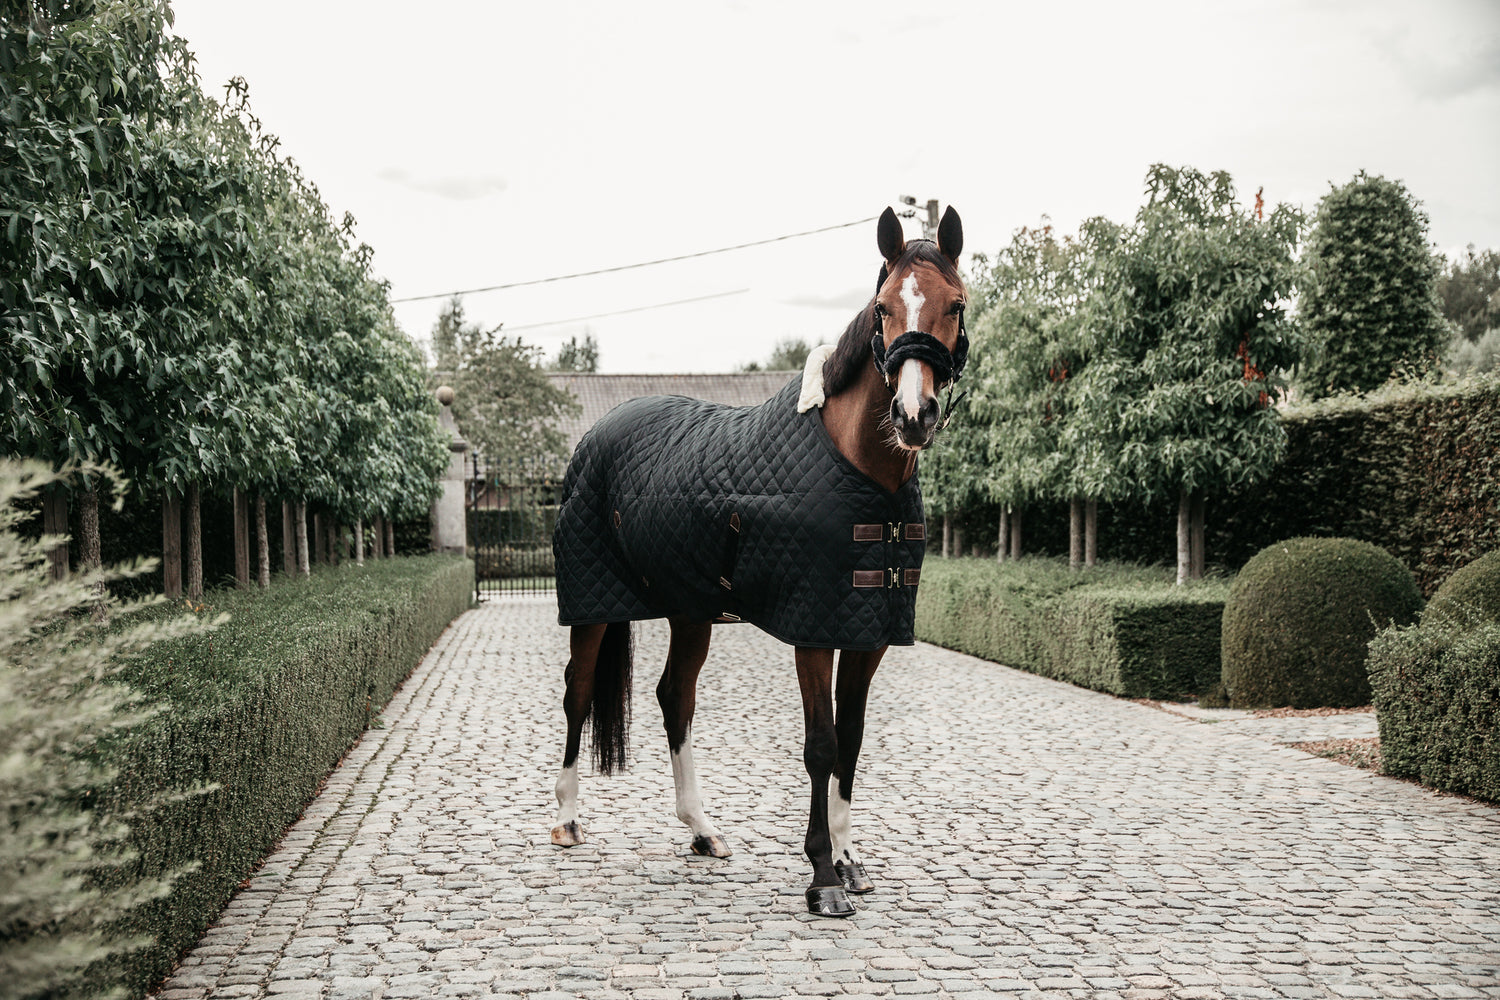 The Kentucky Stable Rug 200g is a stand out product from Kentucky Horsewear from their latest range. For any horse this is a very comfortable rug, a must-have for clipped horses or horses with sensitive skin. A lovely product, it is able to offer great warmth and comfort and it’s also a very easy to use rug for any rider. As well as being able to offer warmth, it is also highly breathable thanks to the combination of the materials.